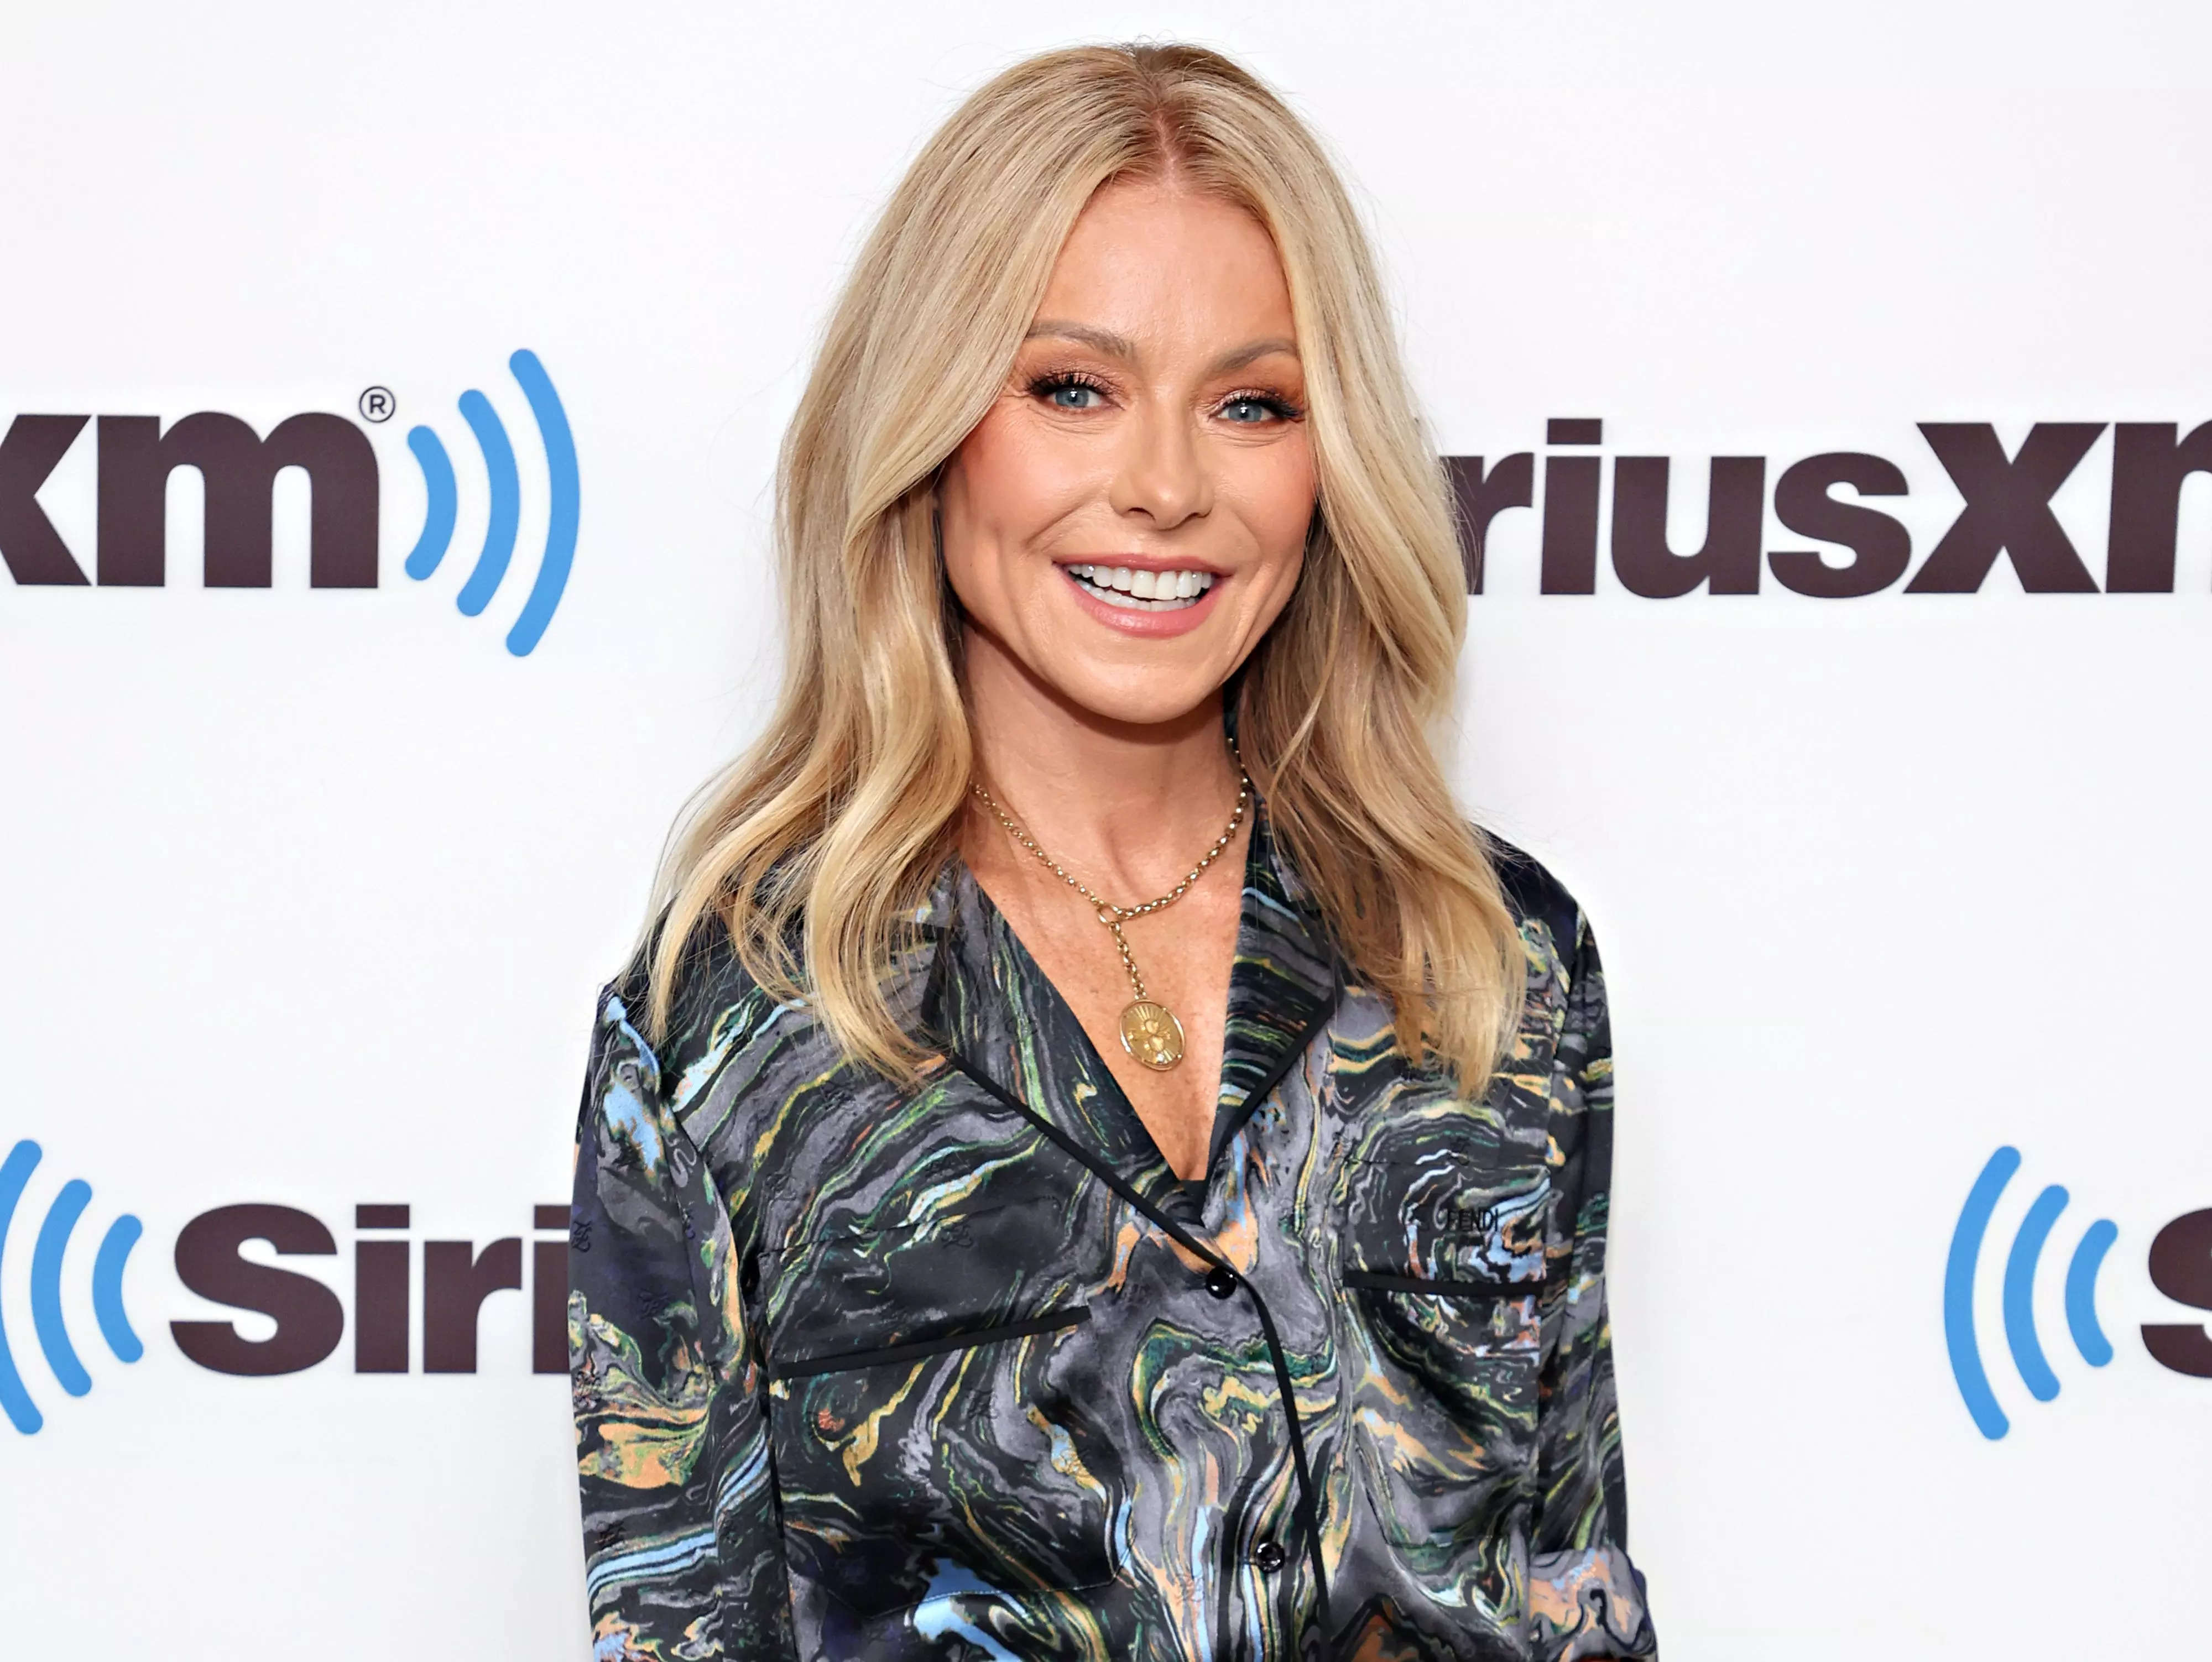 Kelly Ripa warns people not to cut their own hair at home